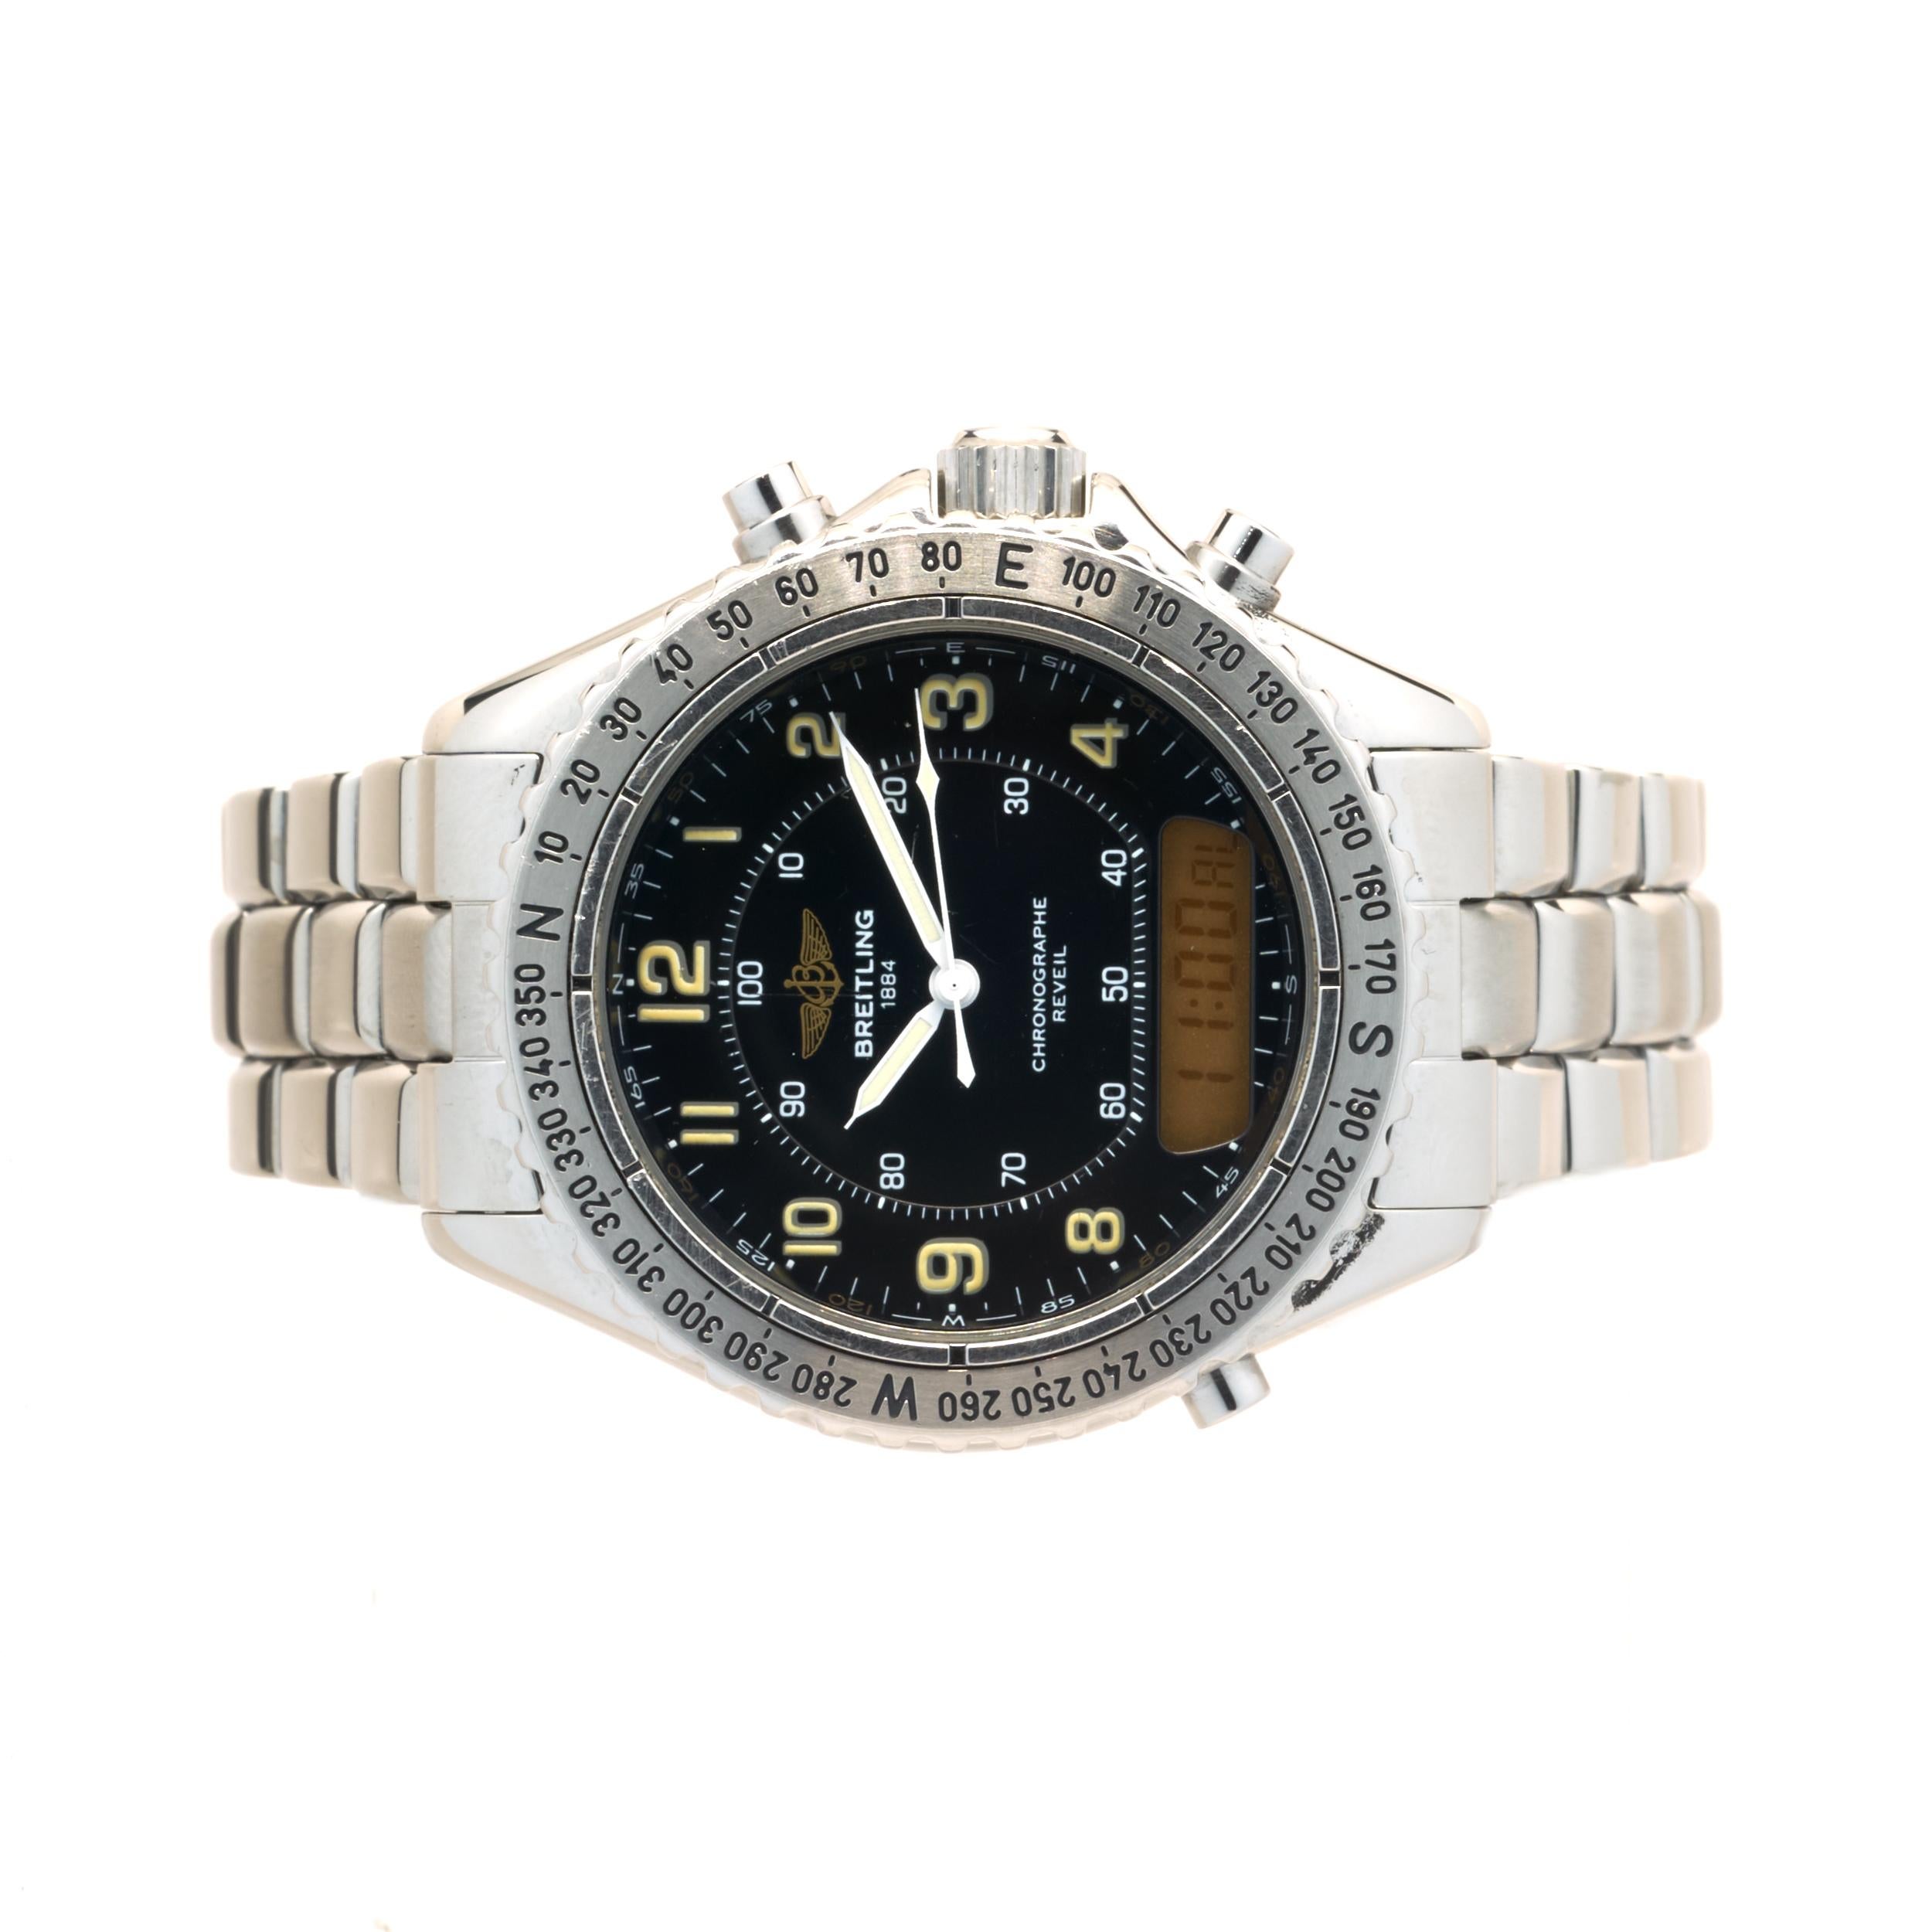 Movement: quartz
Function: hours, minutes, seconds, digital, alarm
Case: round 40mm stainless steel case with rotating bezel, sapphire protective crystal, Breitling engraved case-back, screw-down crown and pushers, water resistant to 100